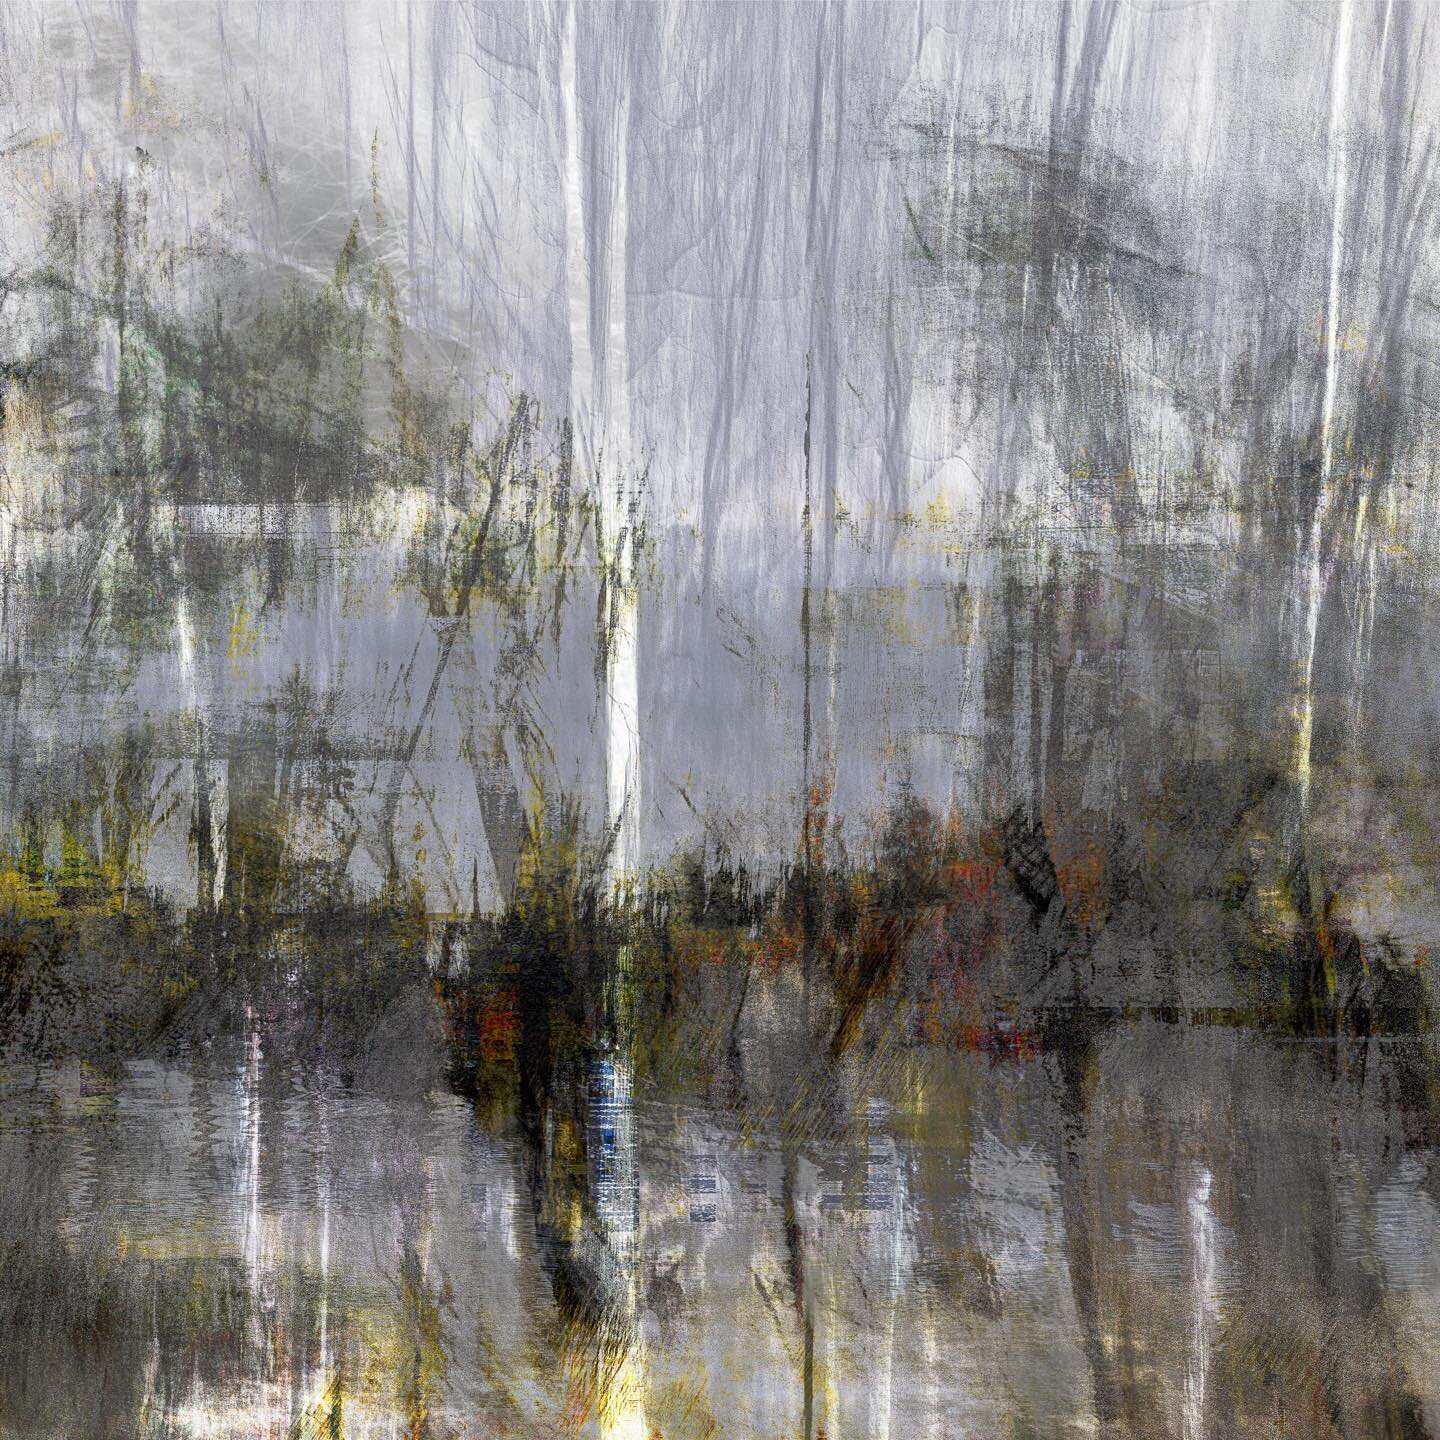 Altered Landscapes no351

Prints available
DM me for information 
#regnierstudio #intentionalcameramovement&nbsp;#icm #abstractphotography&nbsp;#abstract #fineartphotography&nbsp;#impressionism #abstractart&nbsp;#impressionistphotography #icmphotogra